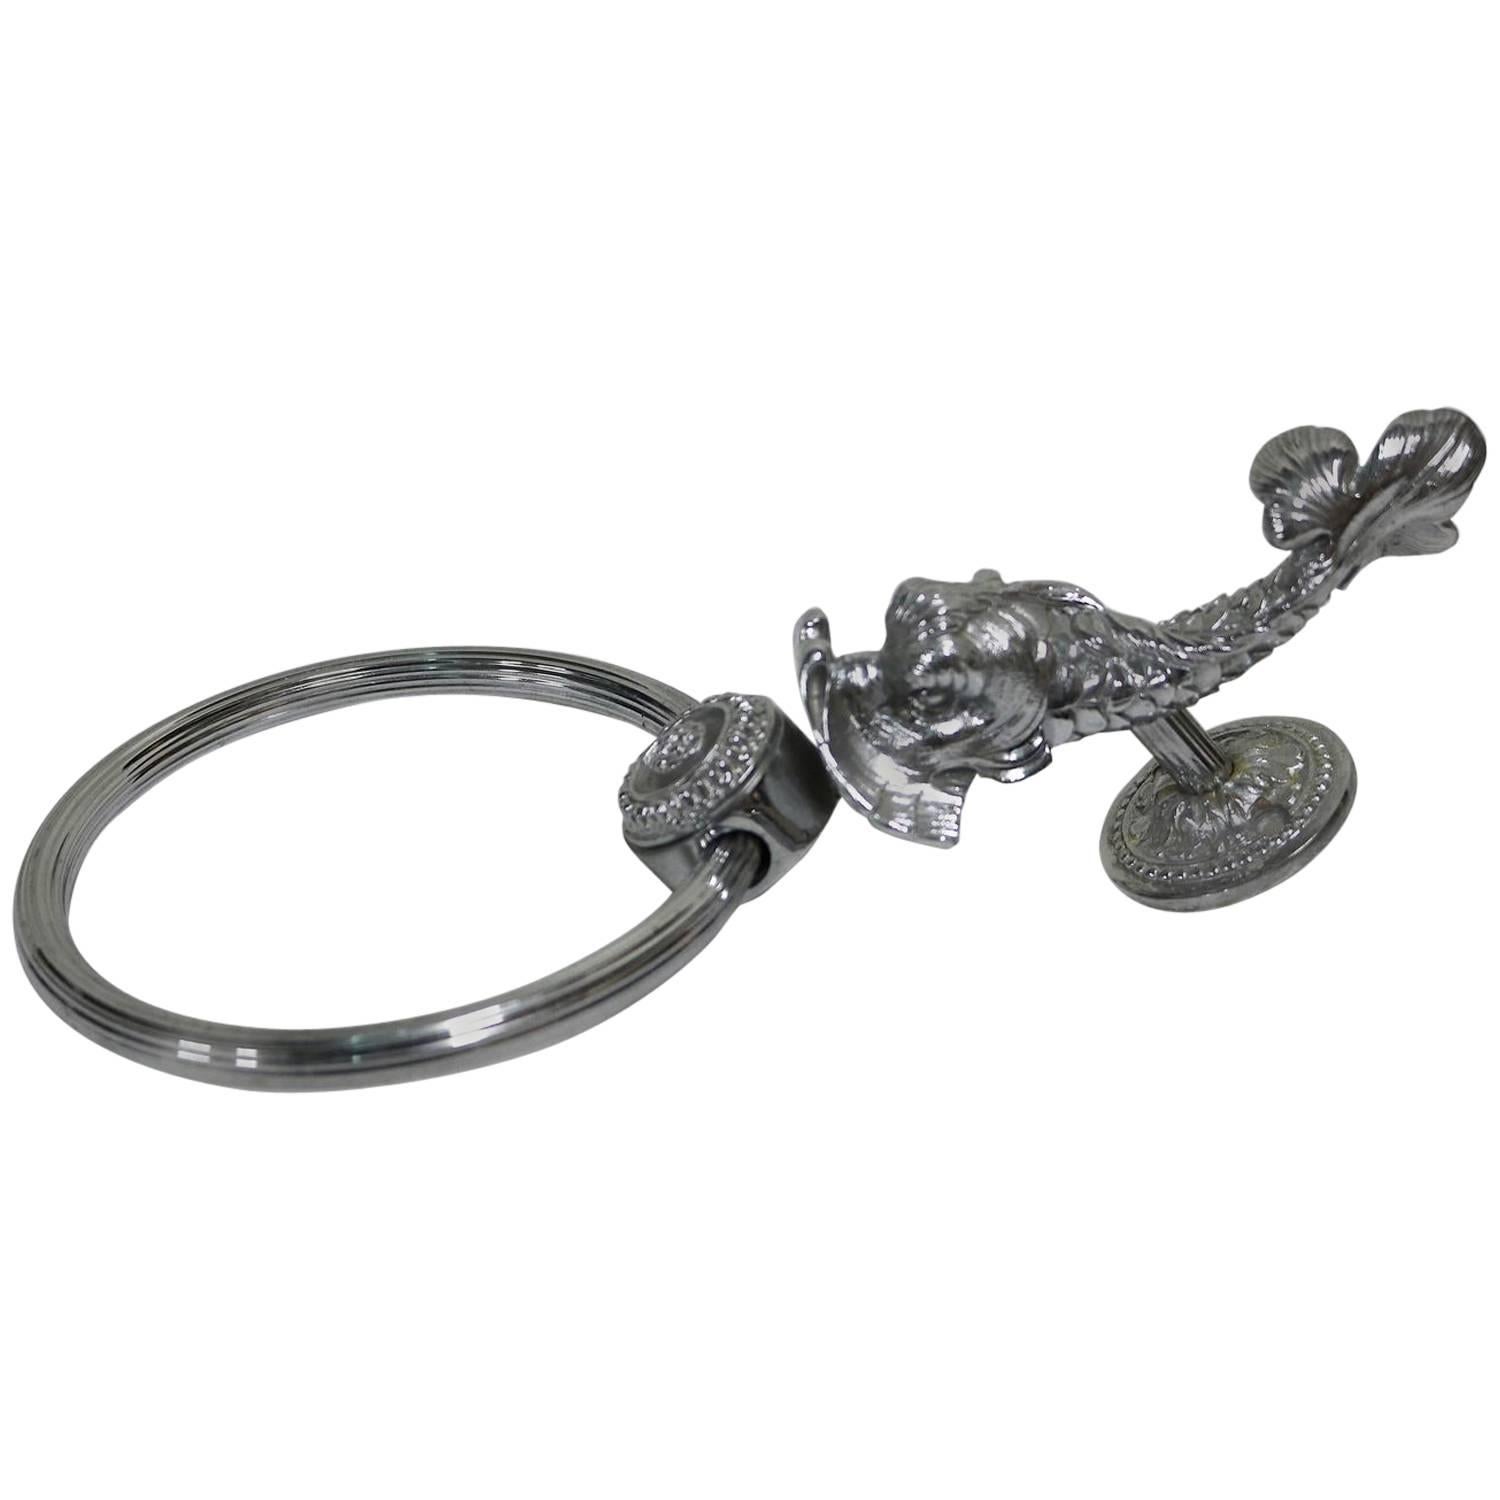 A rare silver finish SW dolphin towel ring.
The dolphin basin set is a Sherle Wagner Classic and the most expensive set in the SW line. Designed by Mr. Wagner himself, it has graced the homes of discerning clientele for decades. in Rare hard to